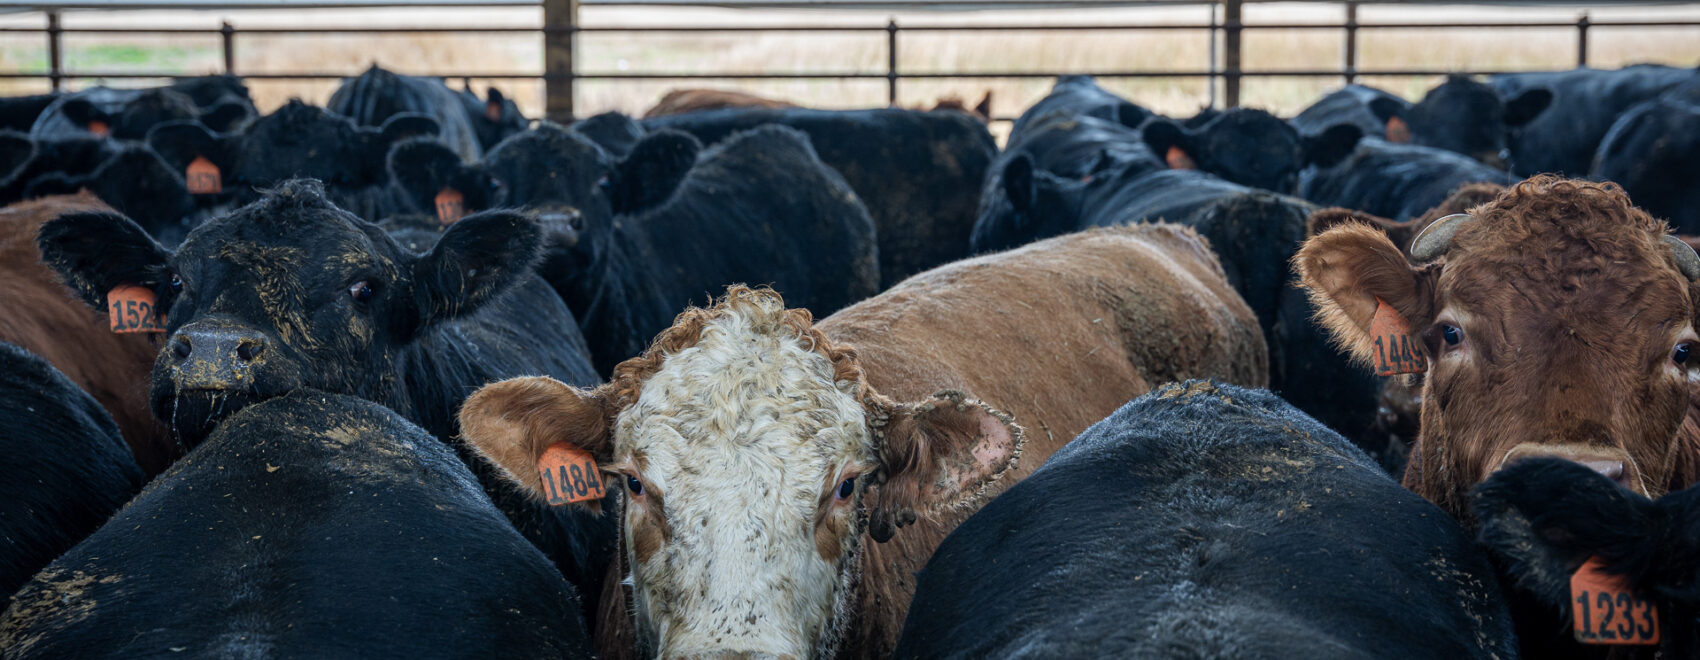 Photo of a cattle feed lot farm